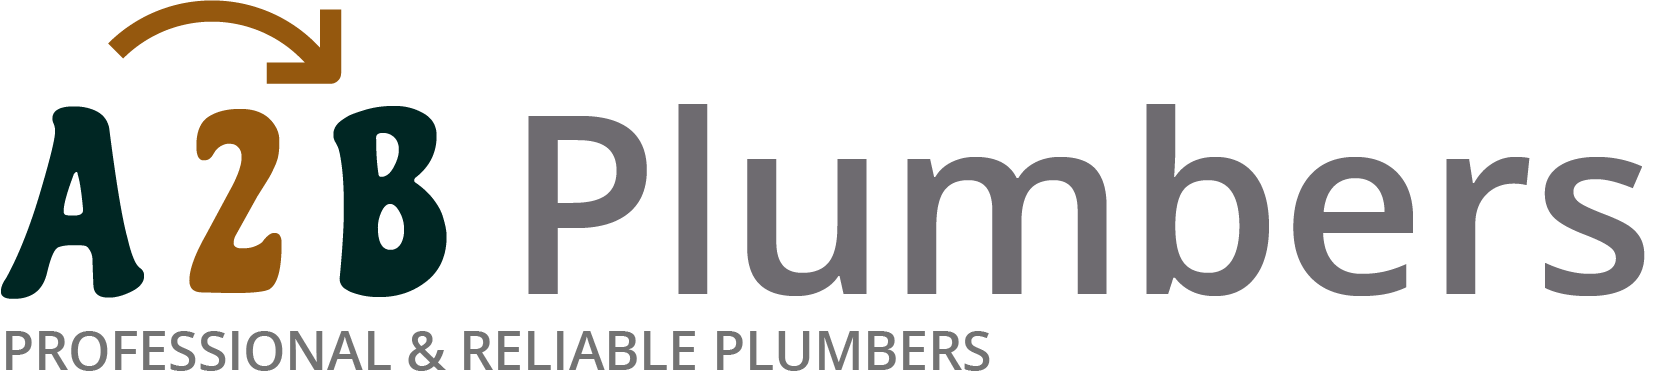 If you need a boiler installed, a radiator repaired or a leaking tap fixed, call us now - we provide services for properties in Perivale and the local area.